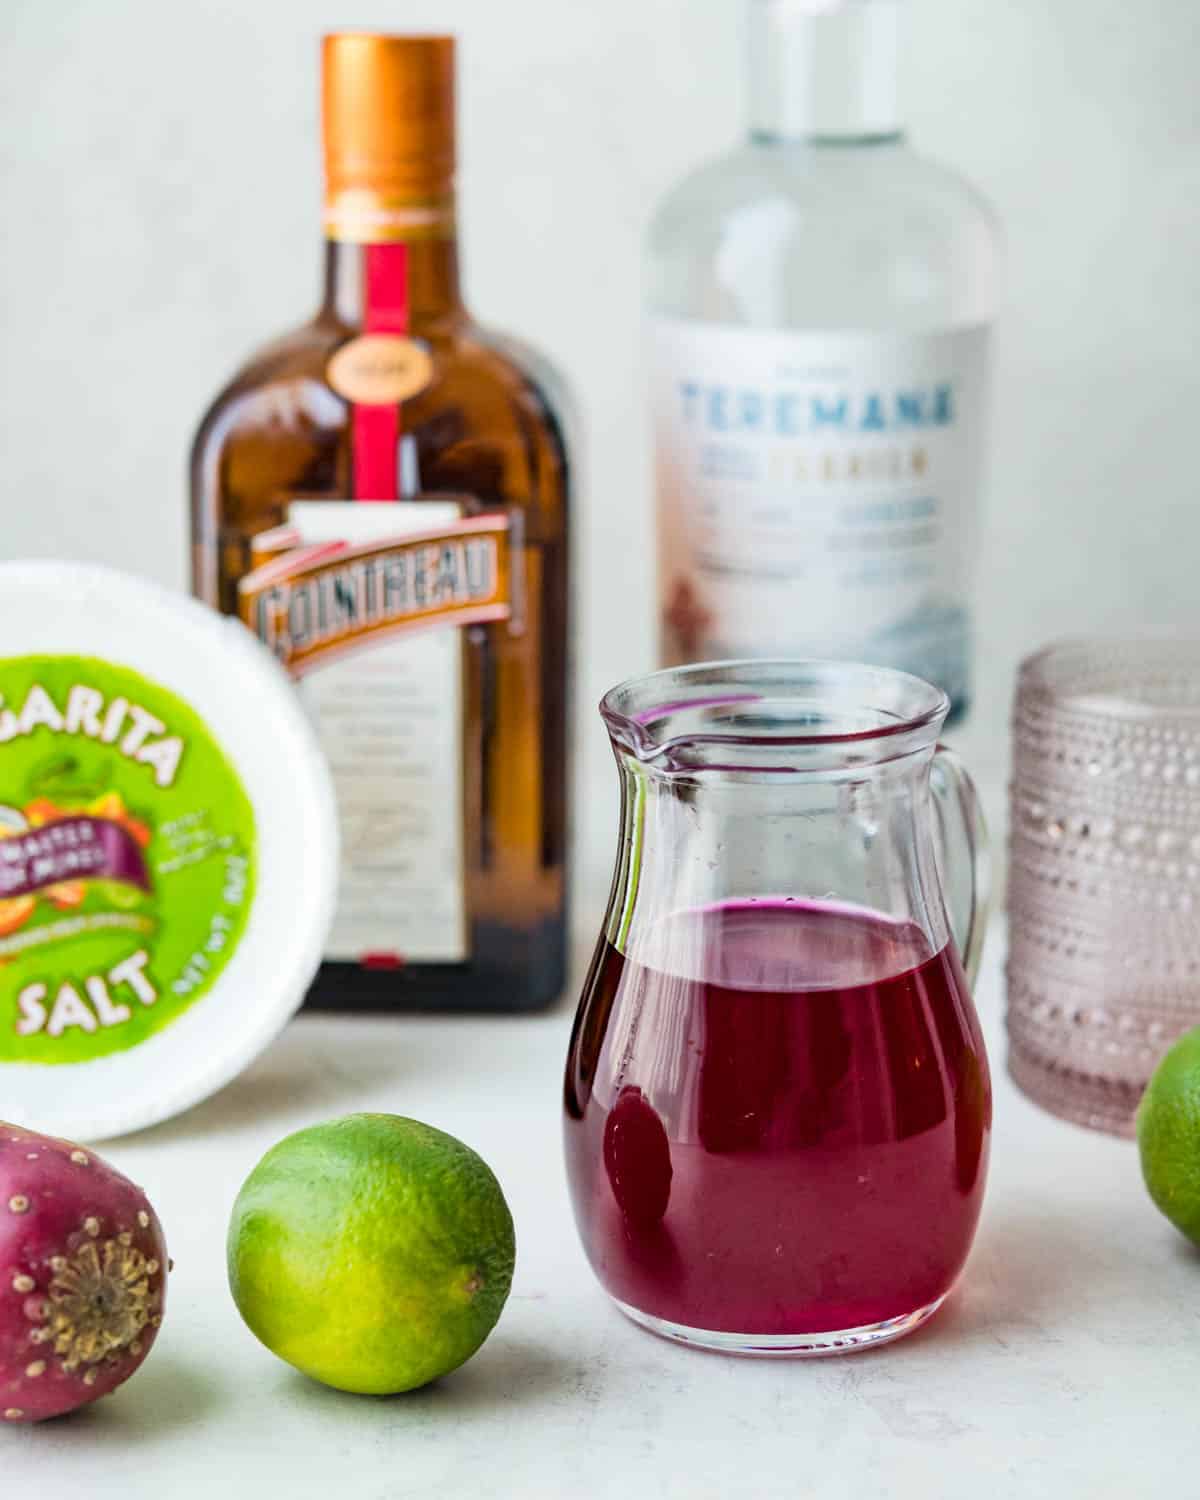 The ingredients to make the prickly pear margarita recipe are prickly pear syrup, Cointreau, lime juice and Tequila.